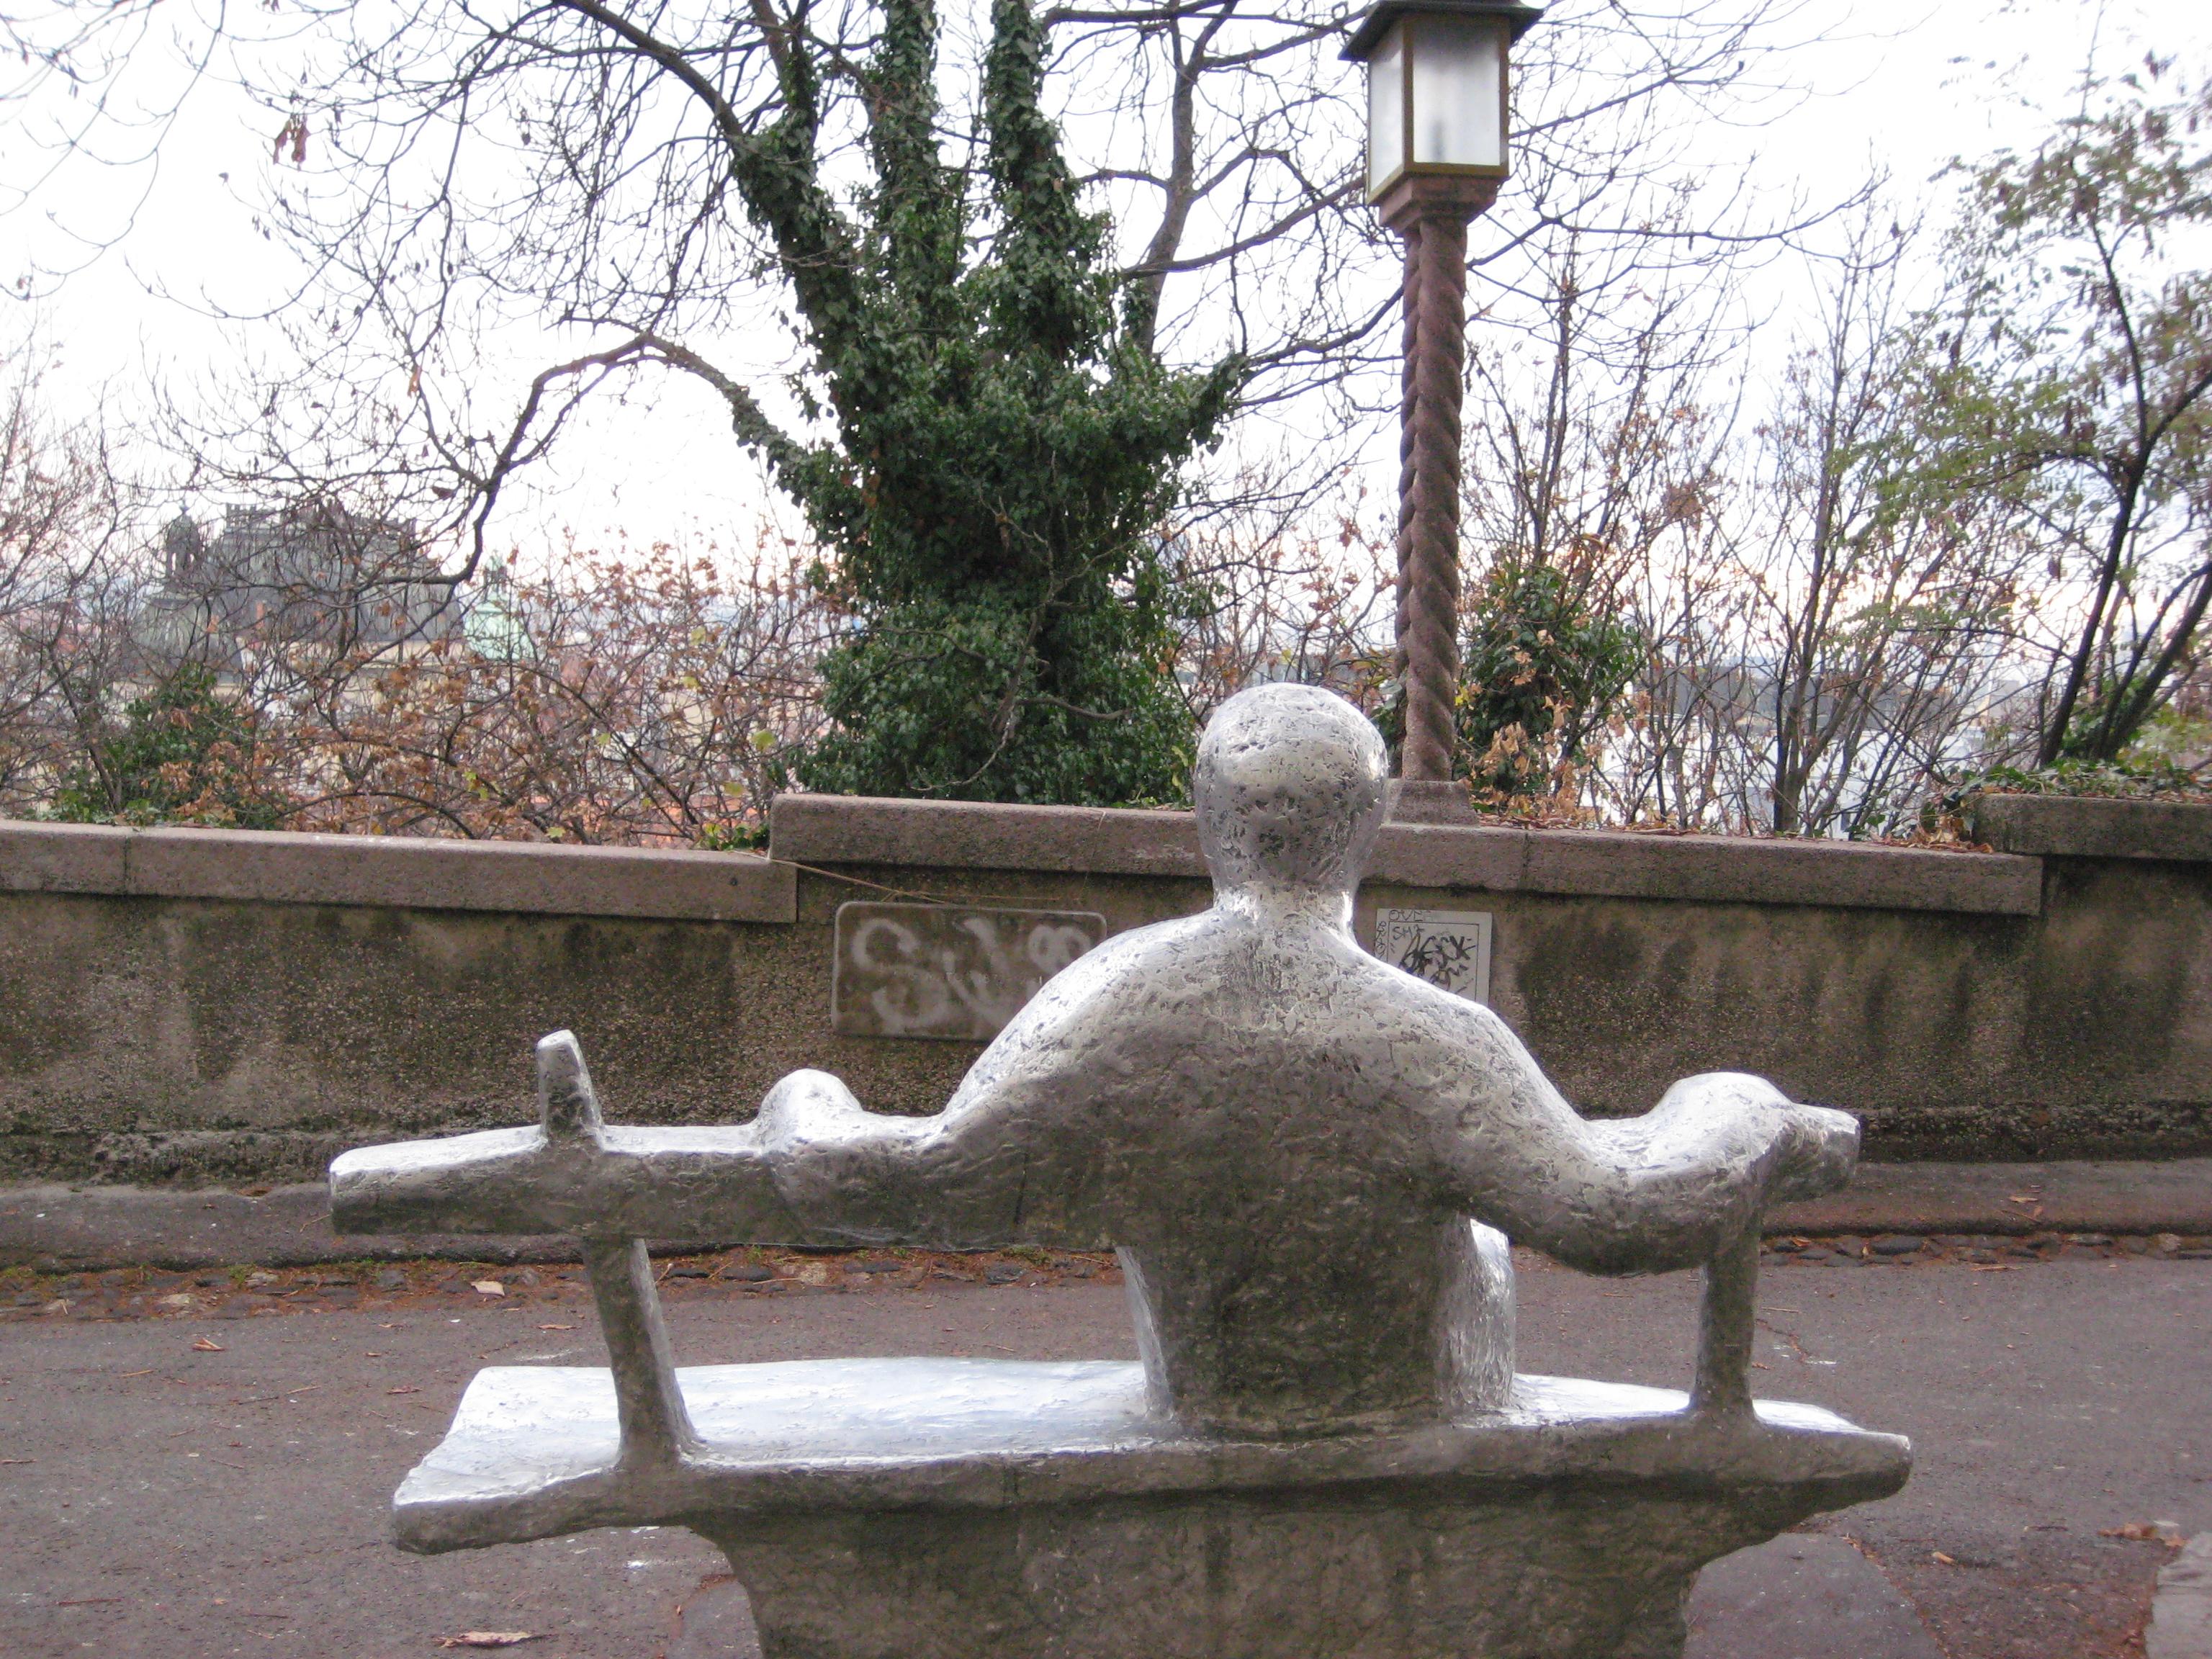 Cover image of this place Poet Sculpture